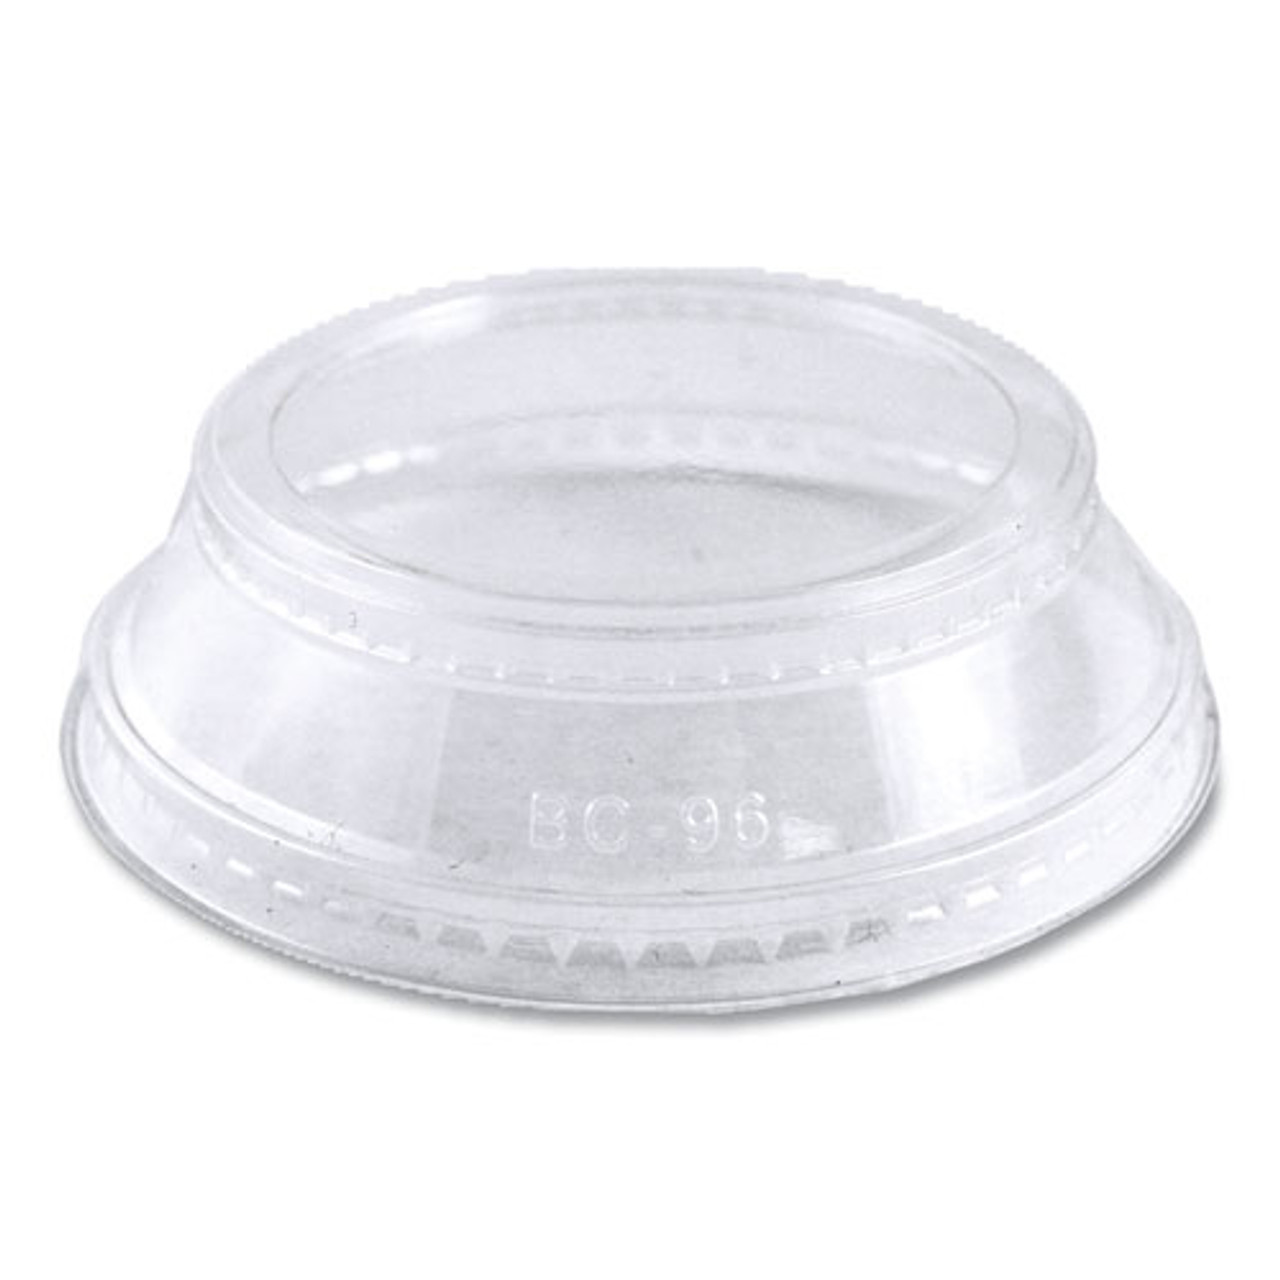 World Centric PLA Clear Cold Cup Lids, Fits 9 oz to 24 oz Cups, Clear, 1,000/Carton